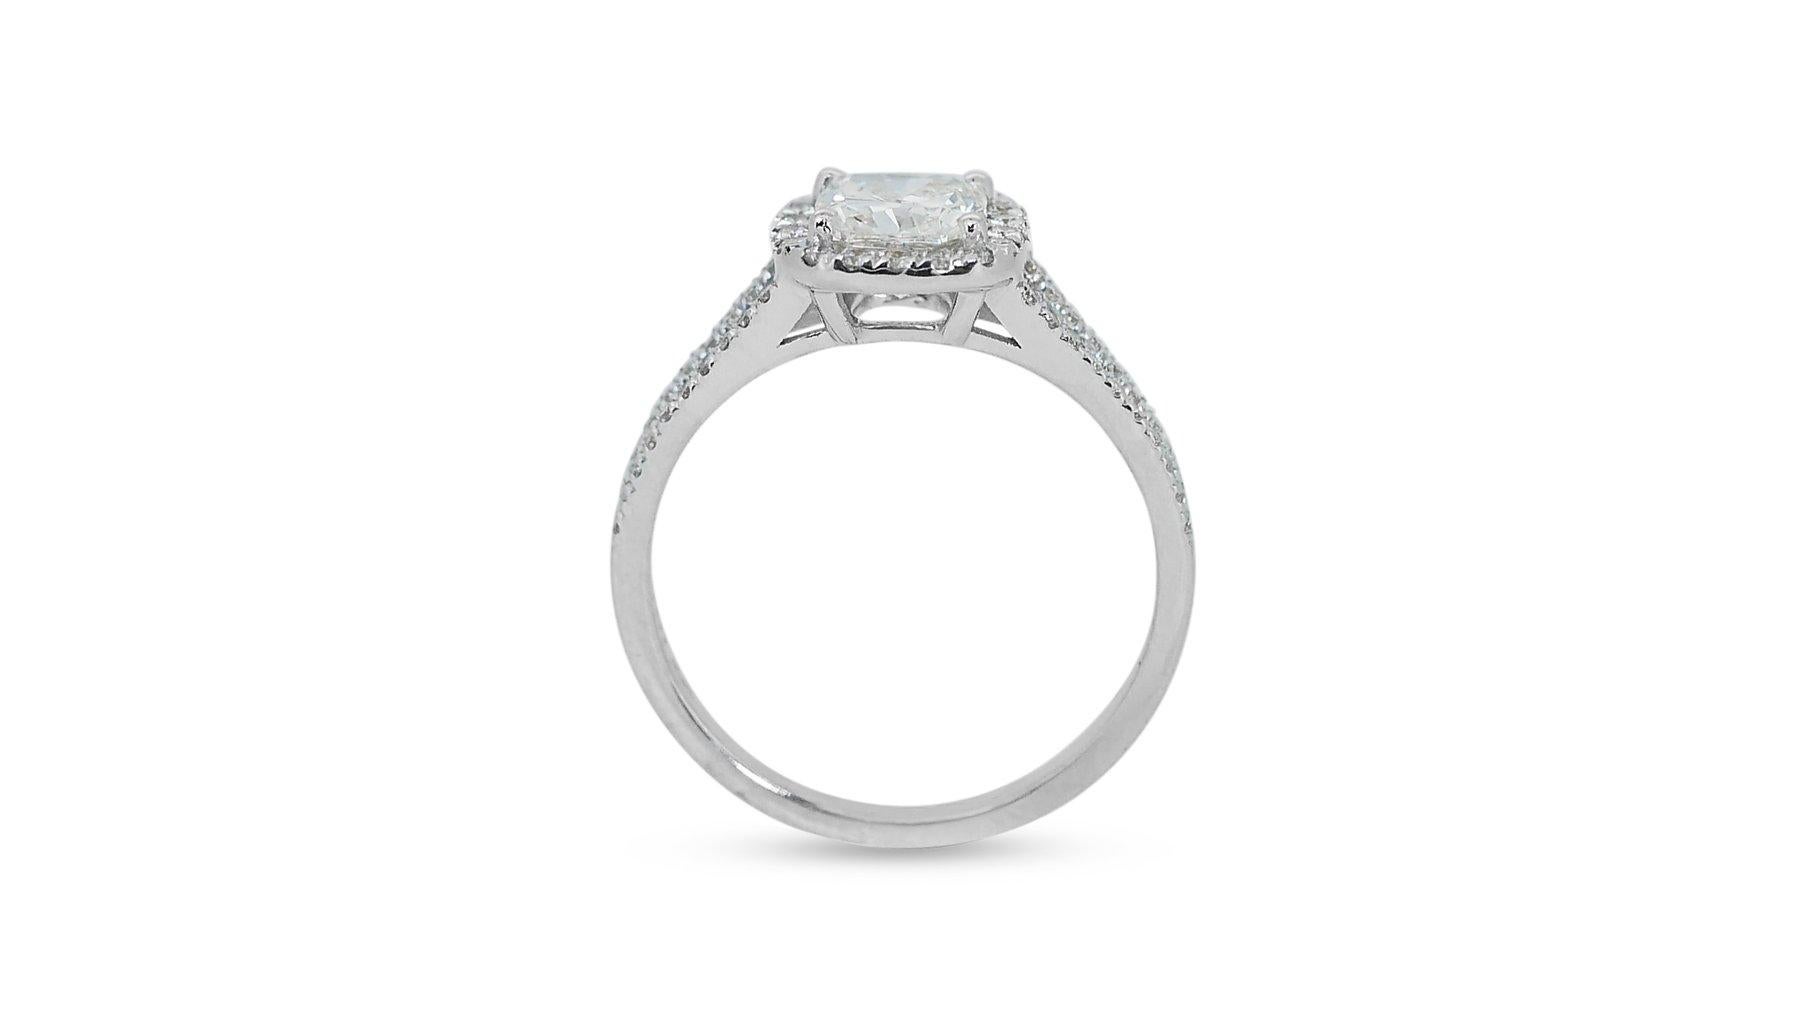 Women's Captivating Ring features a Dazzling 1.01 carat cushion cut Natural Diamond